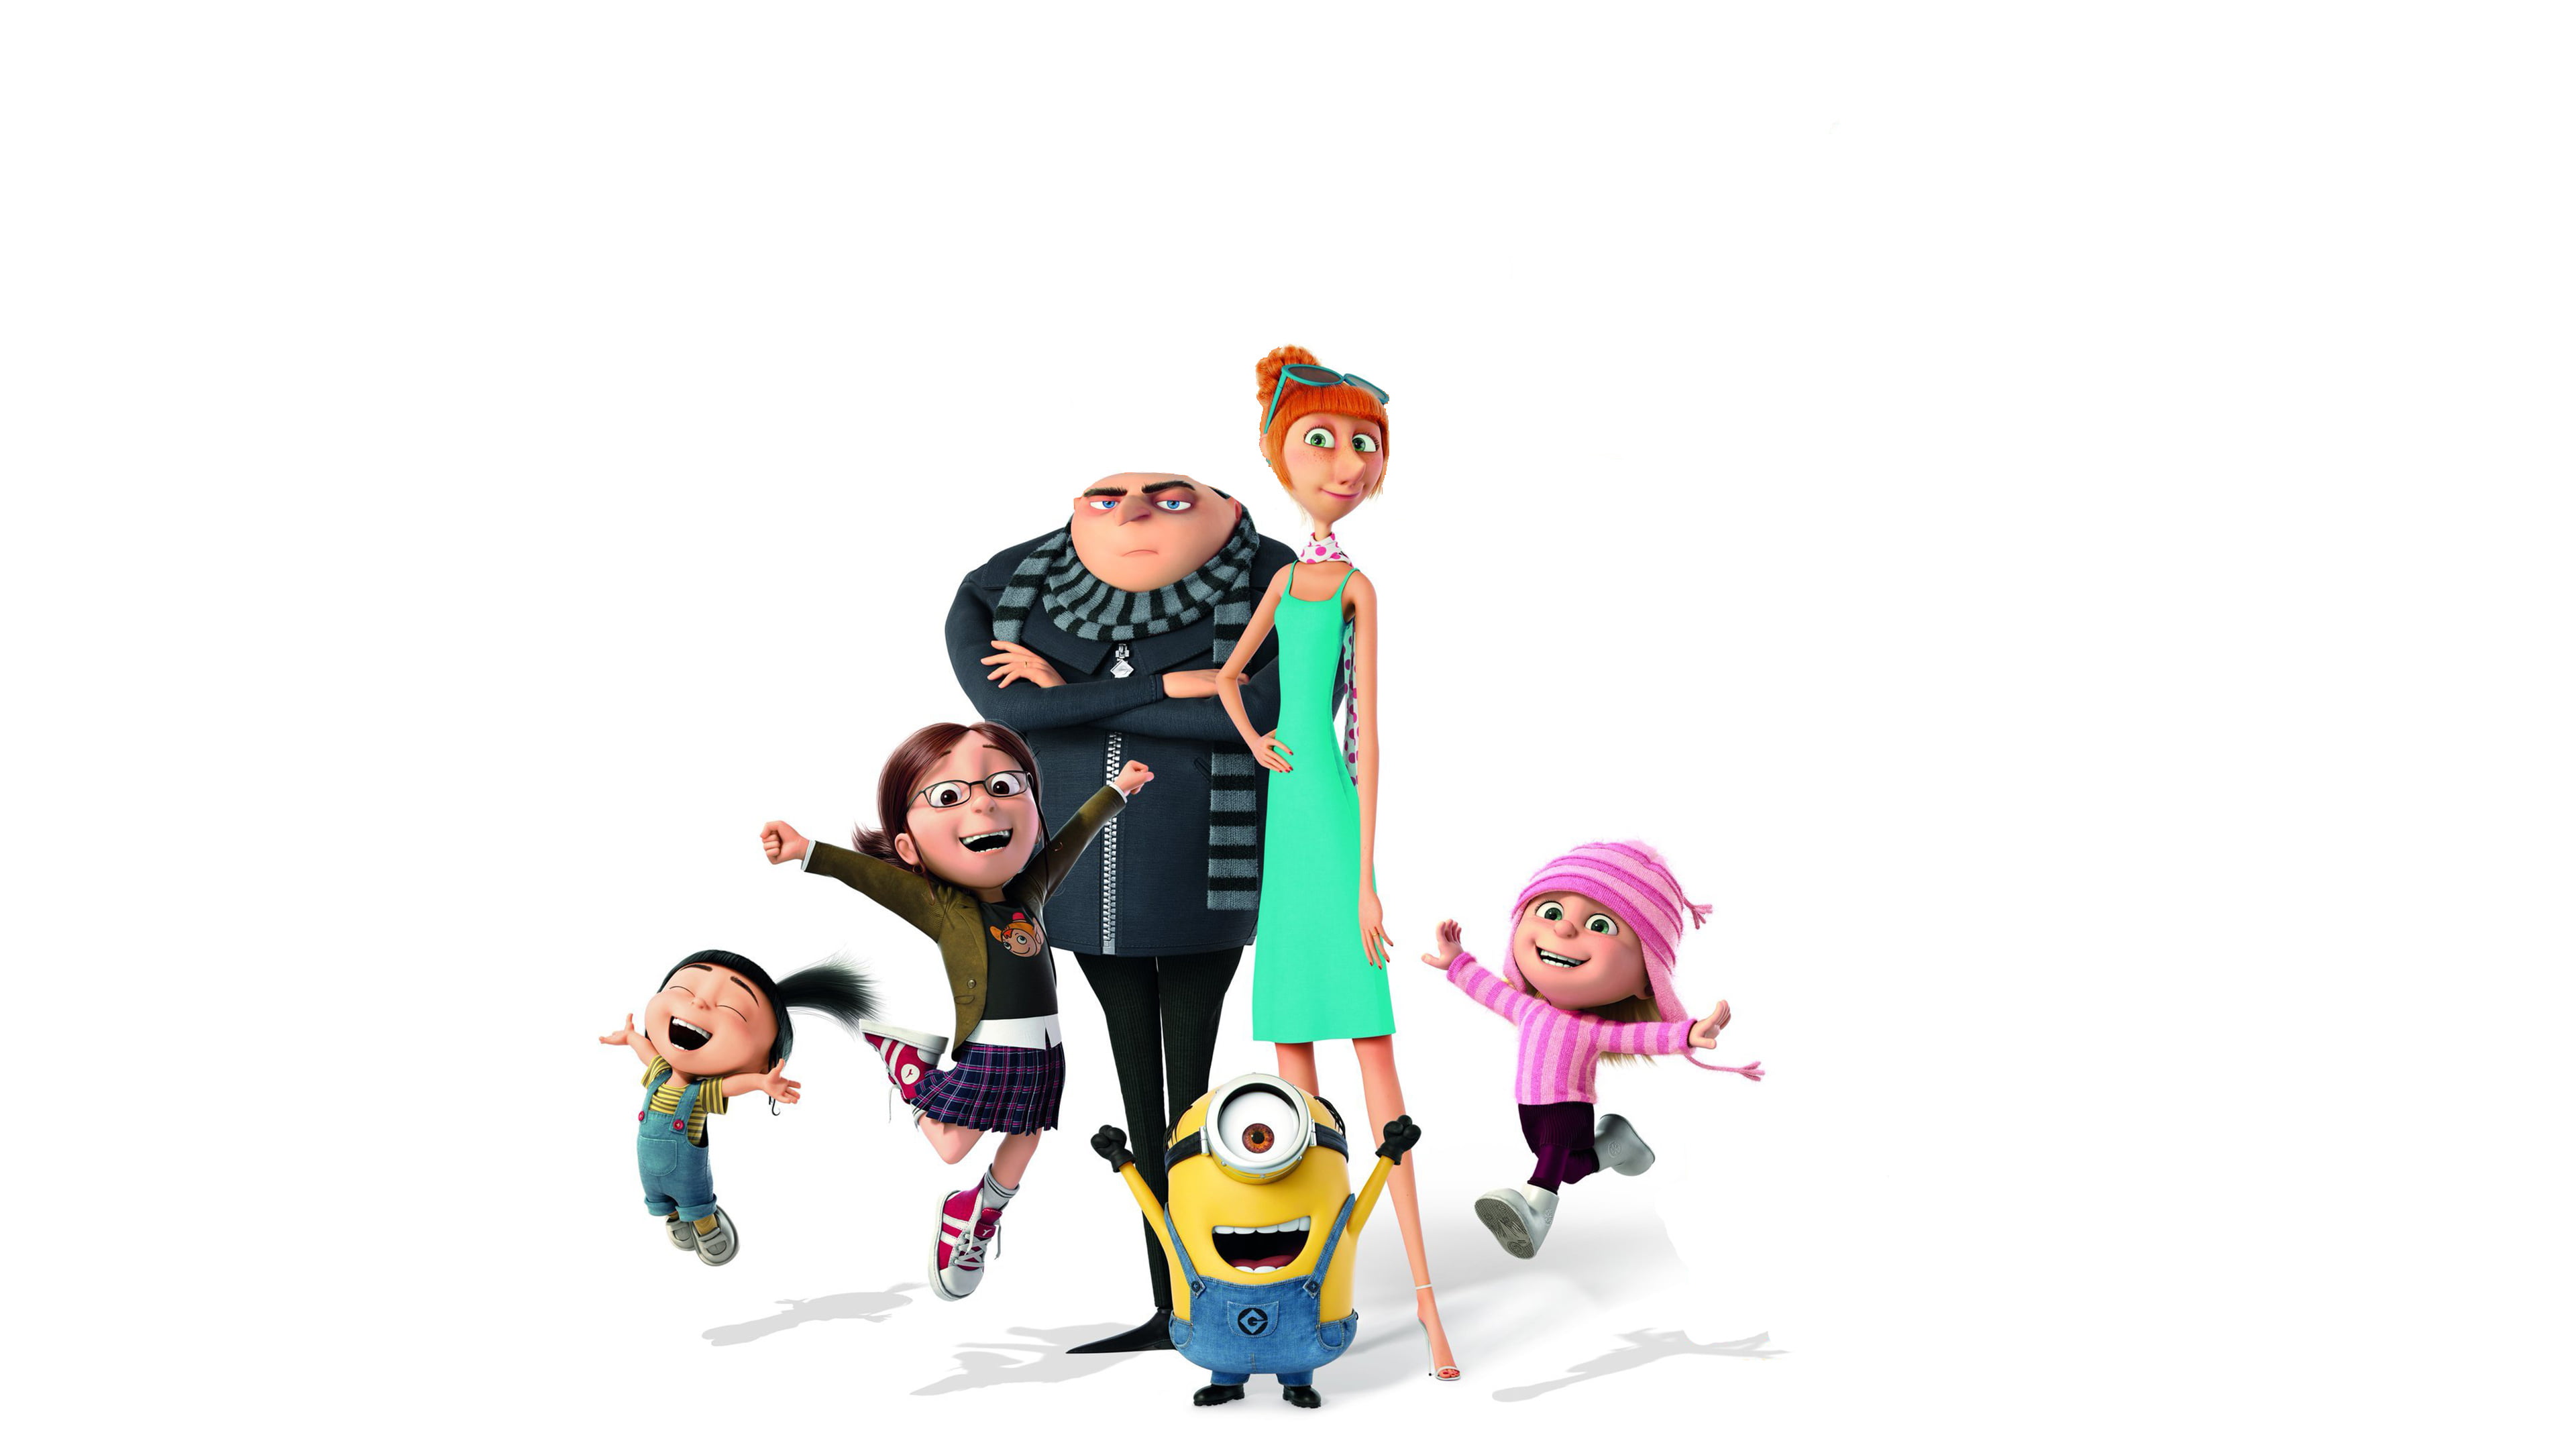 despicable me 3, minions, 2017 movies, animated movies, hd